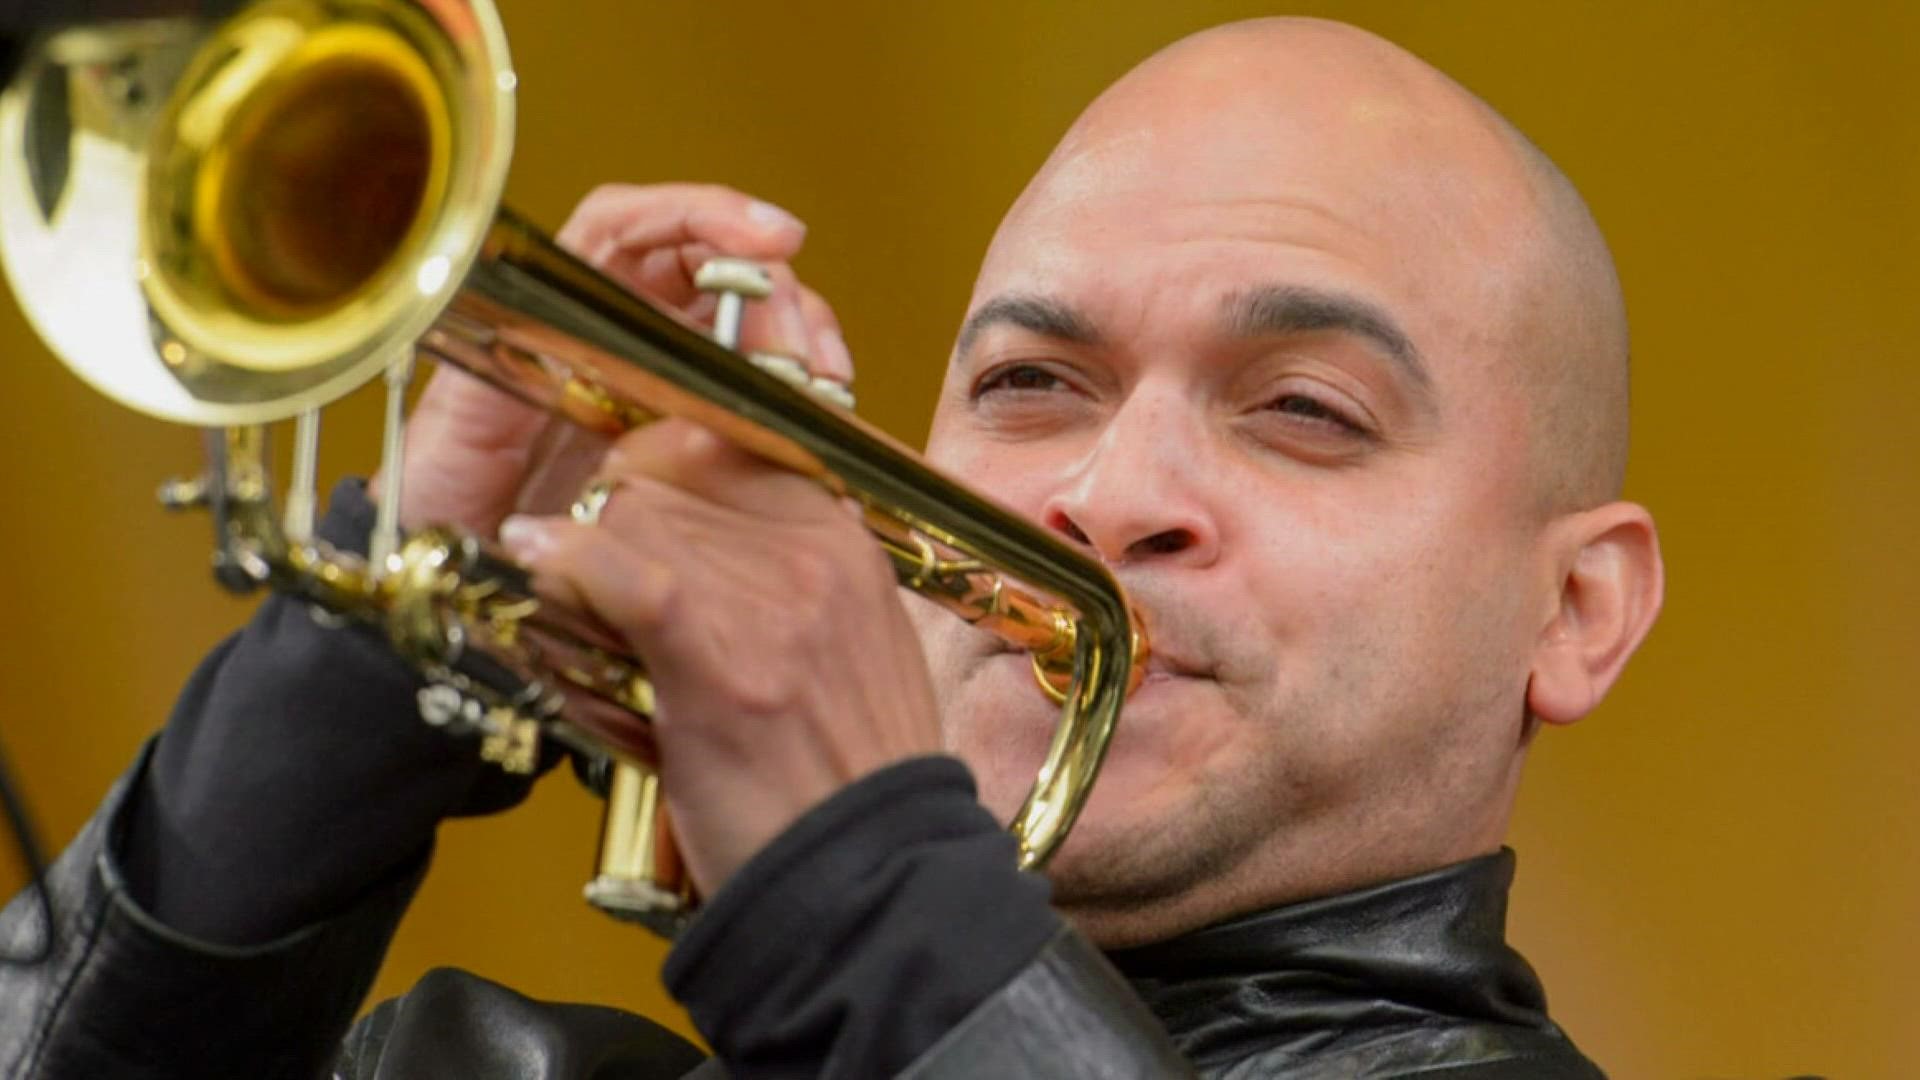 Trumpeter Irvin Mayfield has been sentenced to 18 months in prison after appropriating funds from a library foundation.